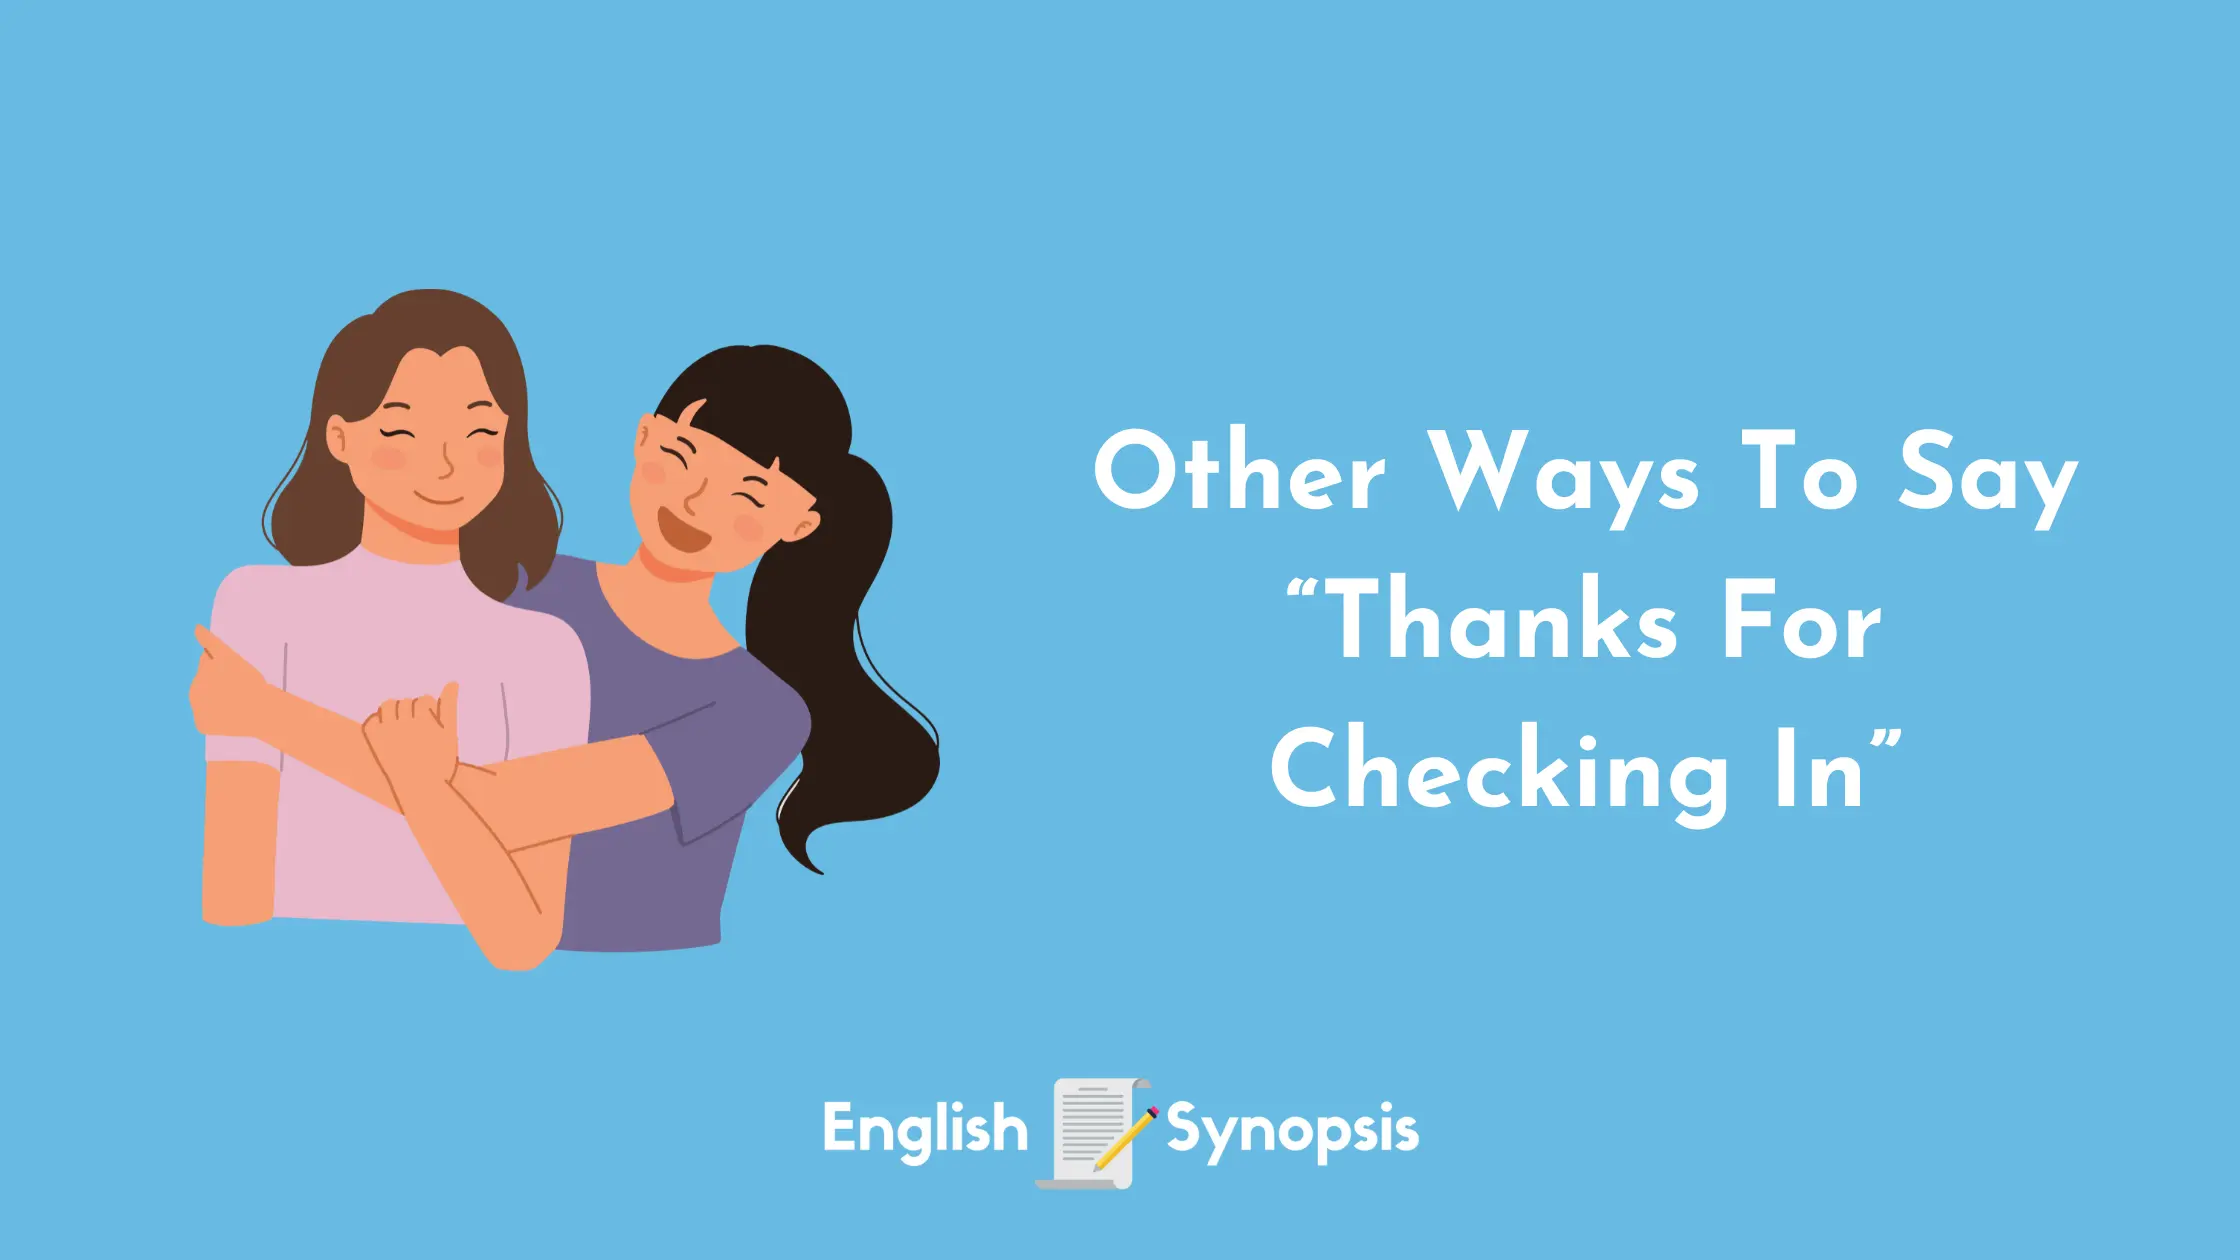 Other Ways To Say "Thanks For Checking In"